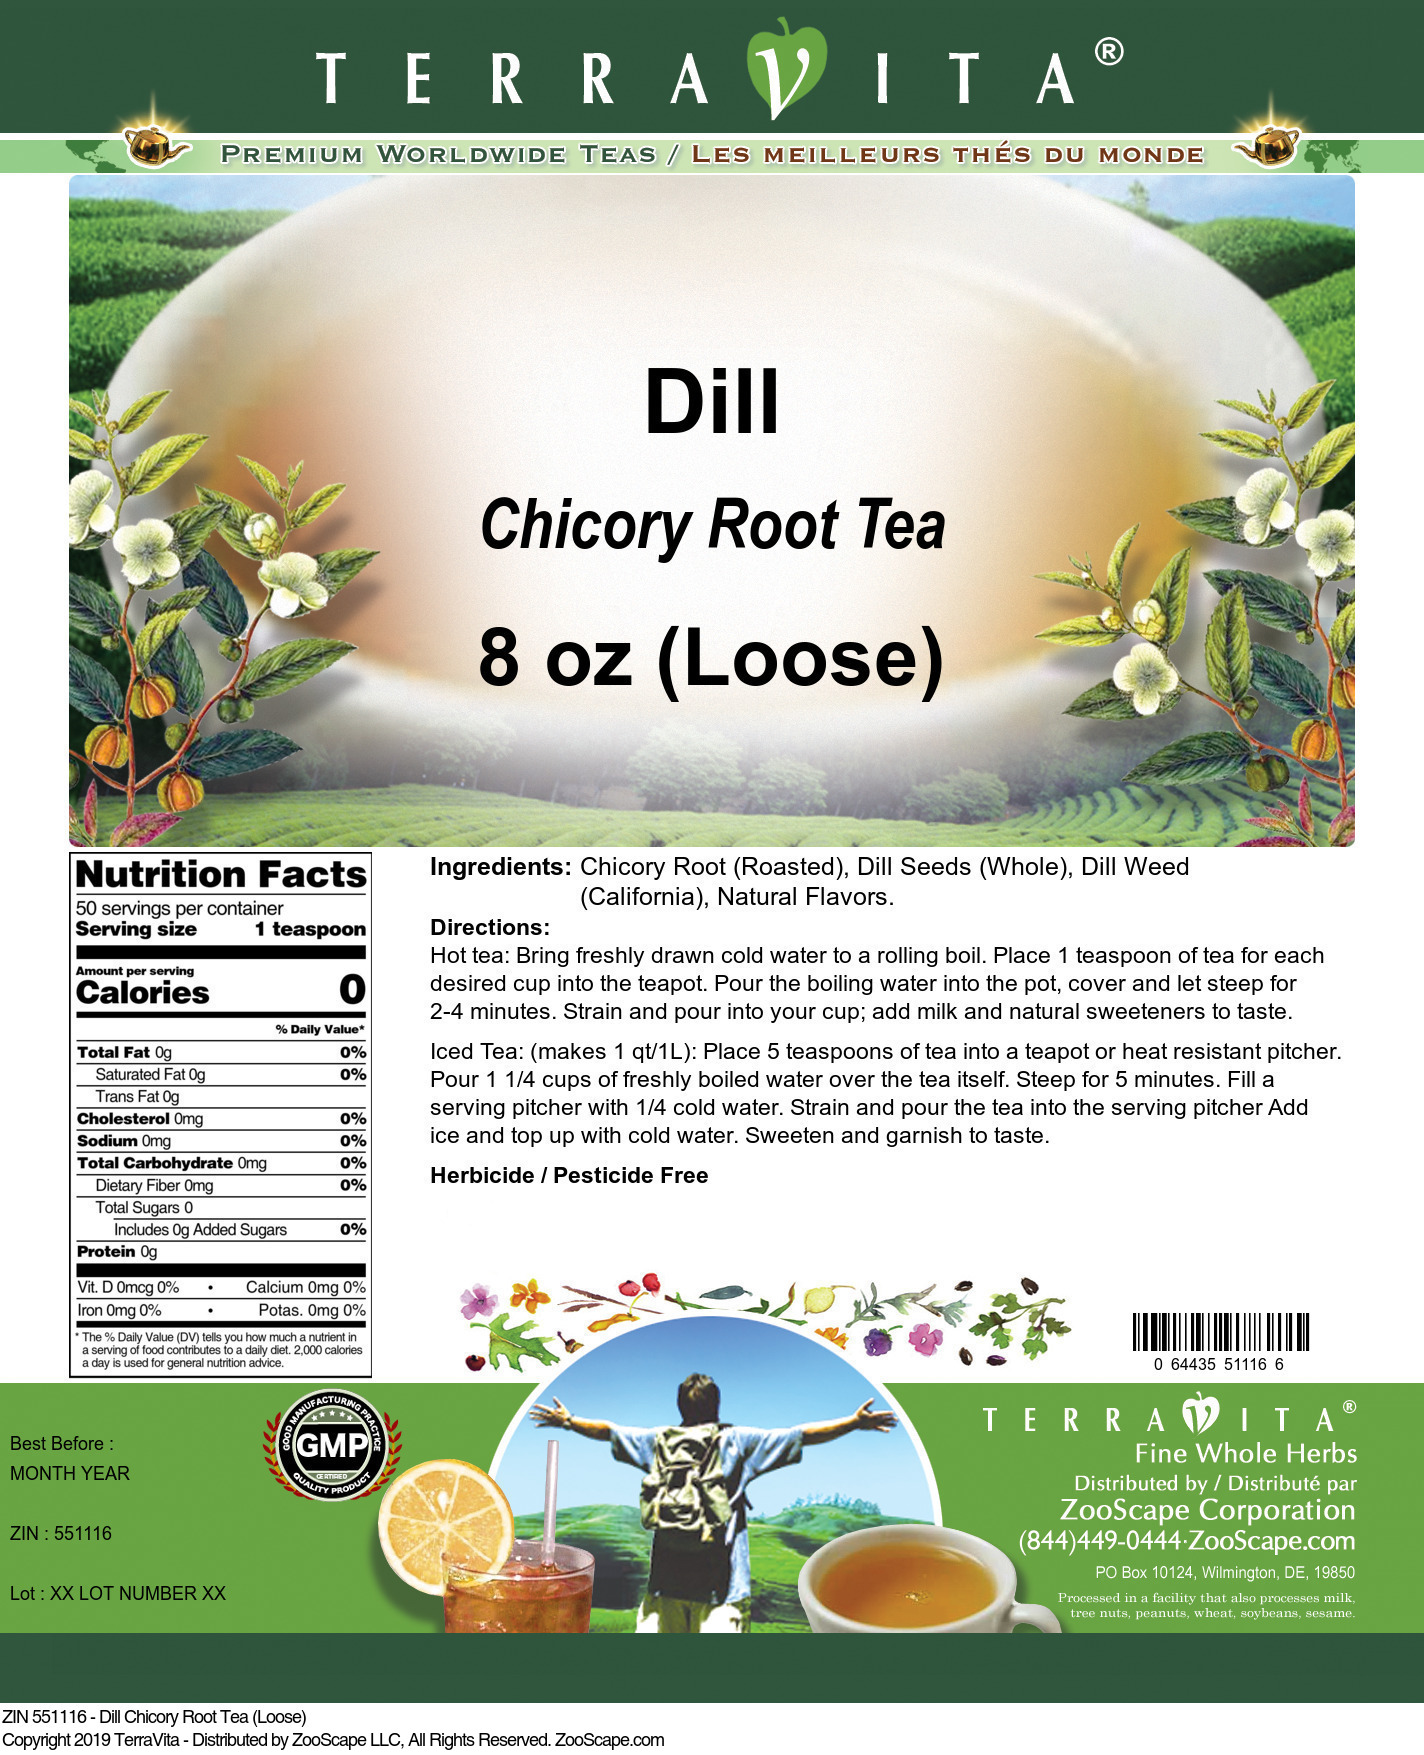 Dill Chicory Root Tea (Loose) - Label